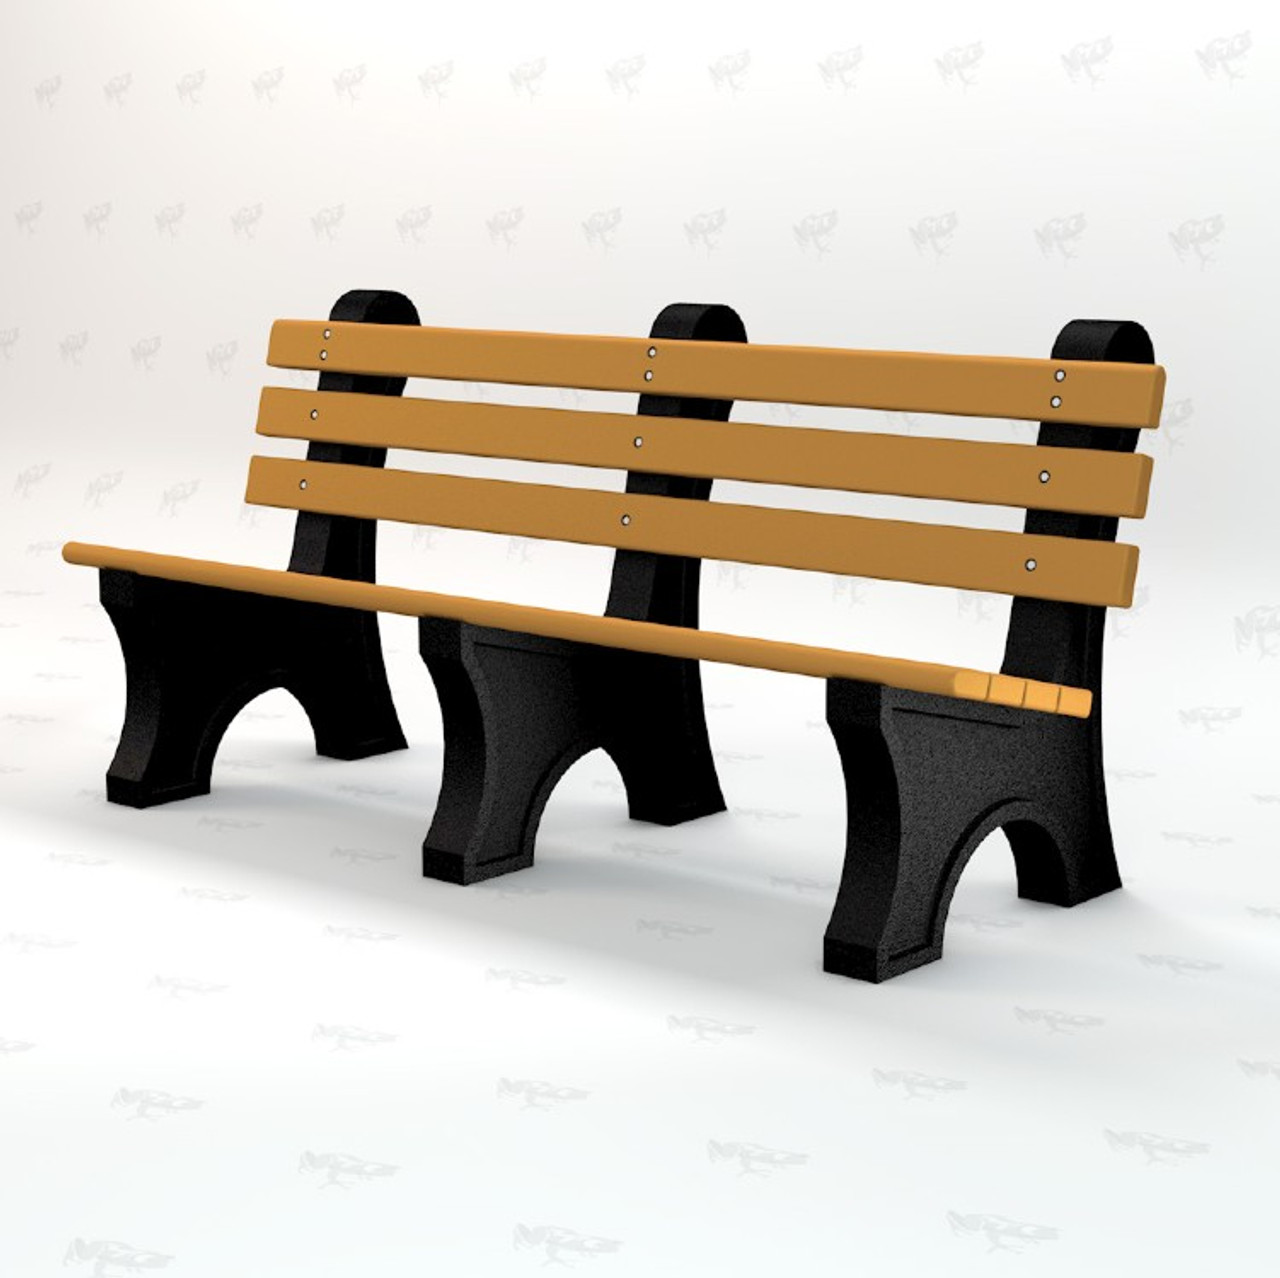 Heritage Park Bench, Recycled Plastic, Park Benches